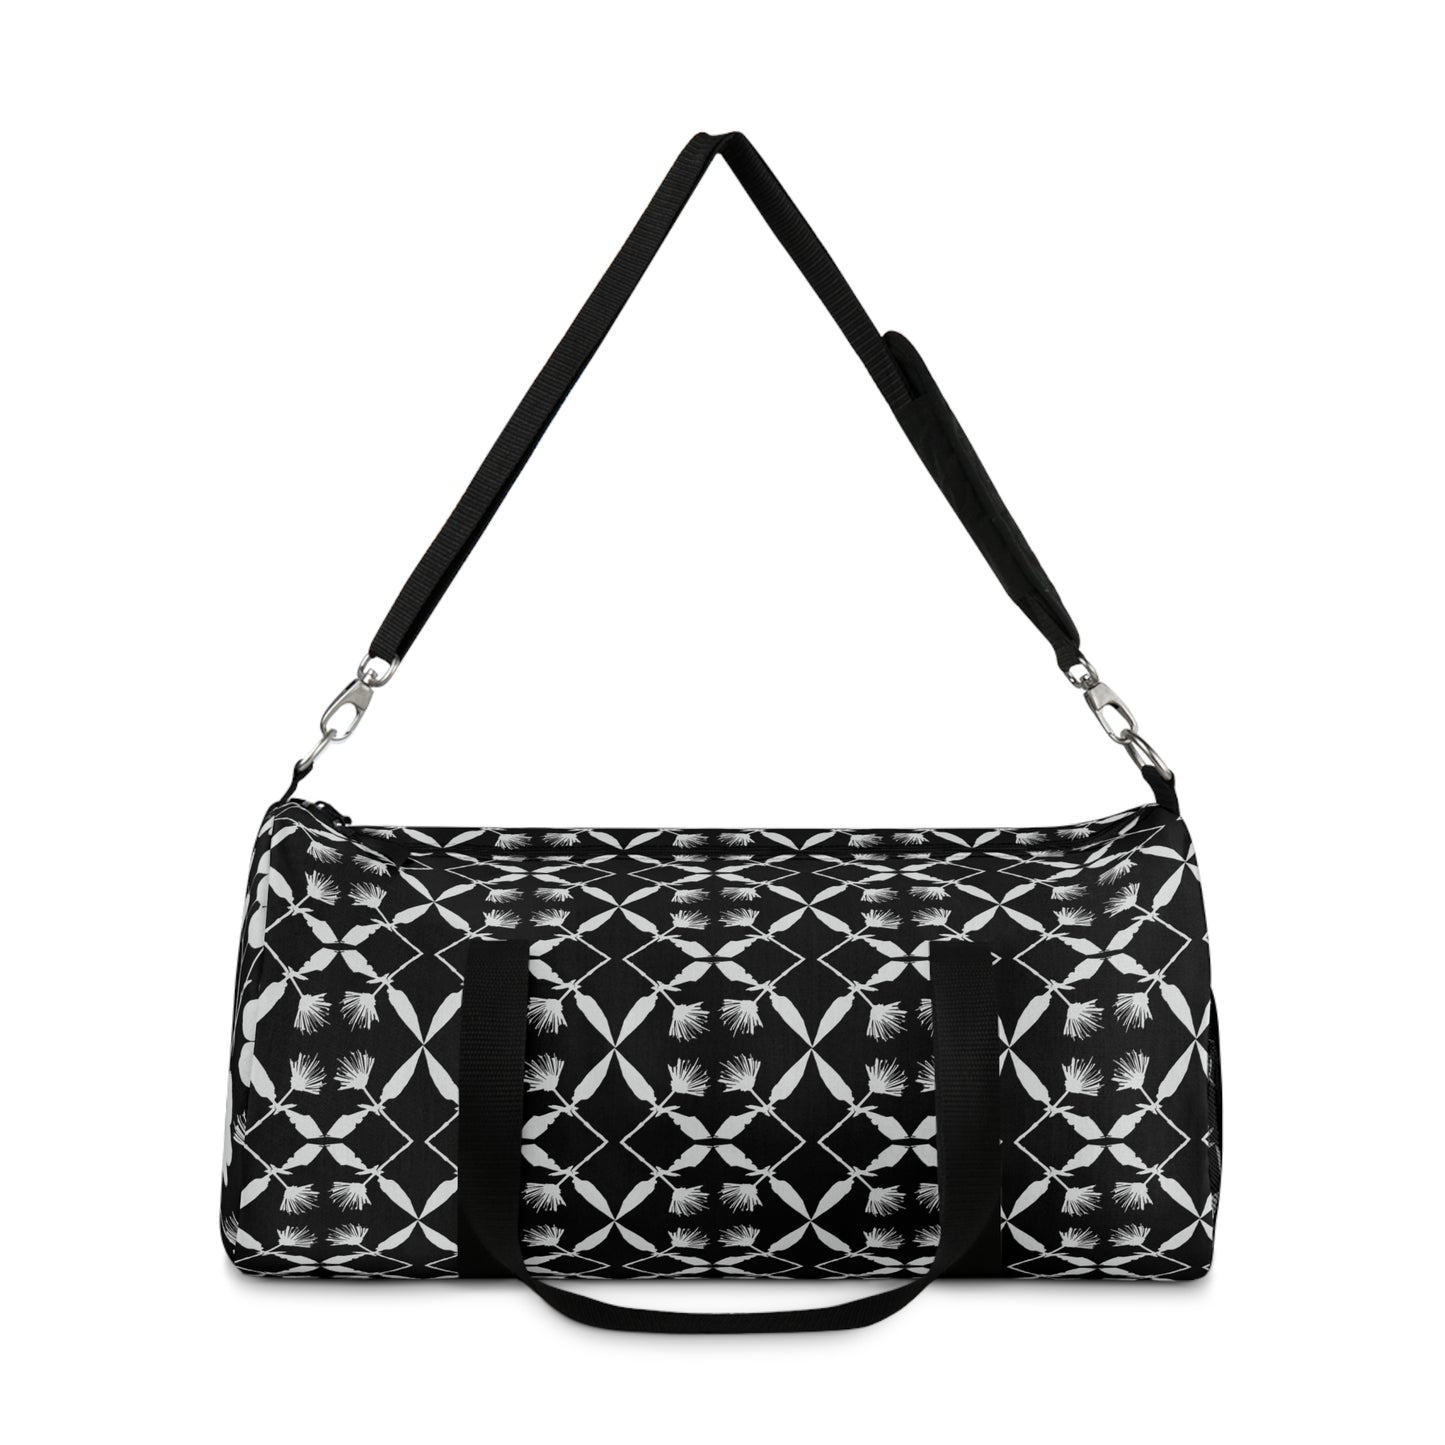 Black and White Floral Duffel Bag